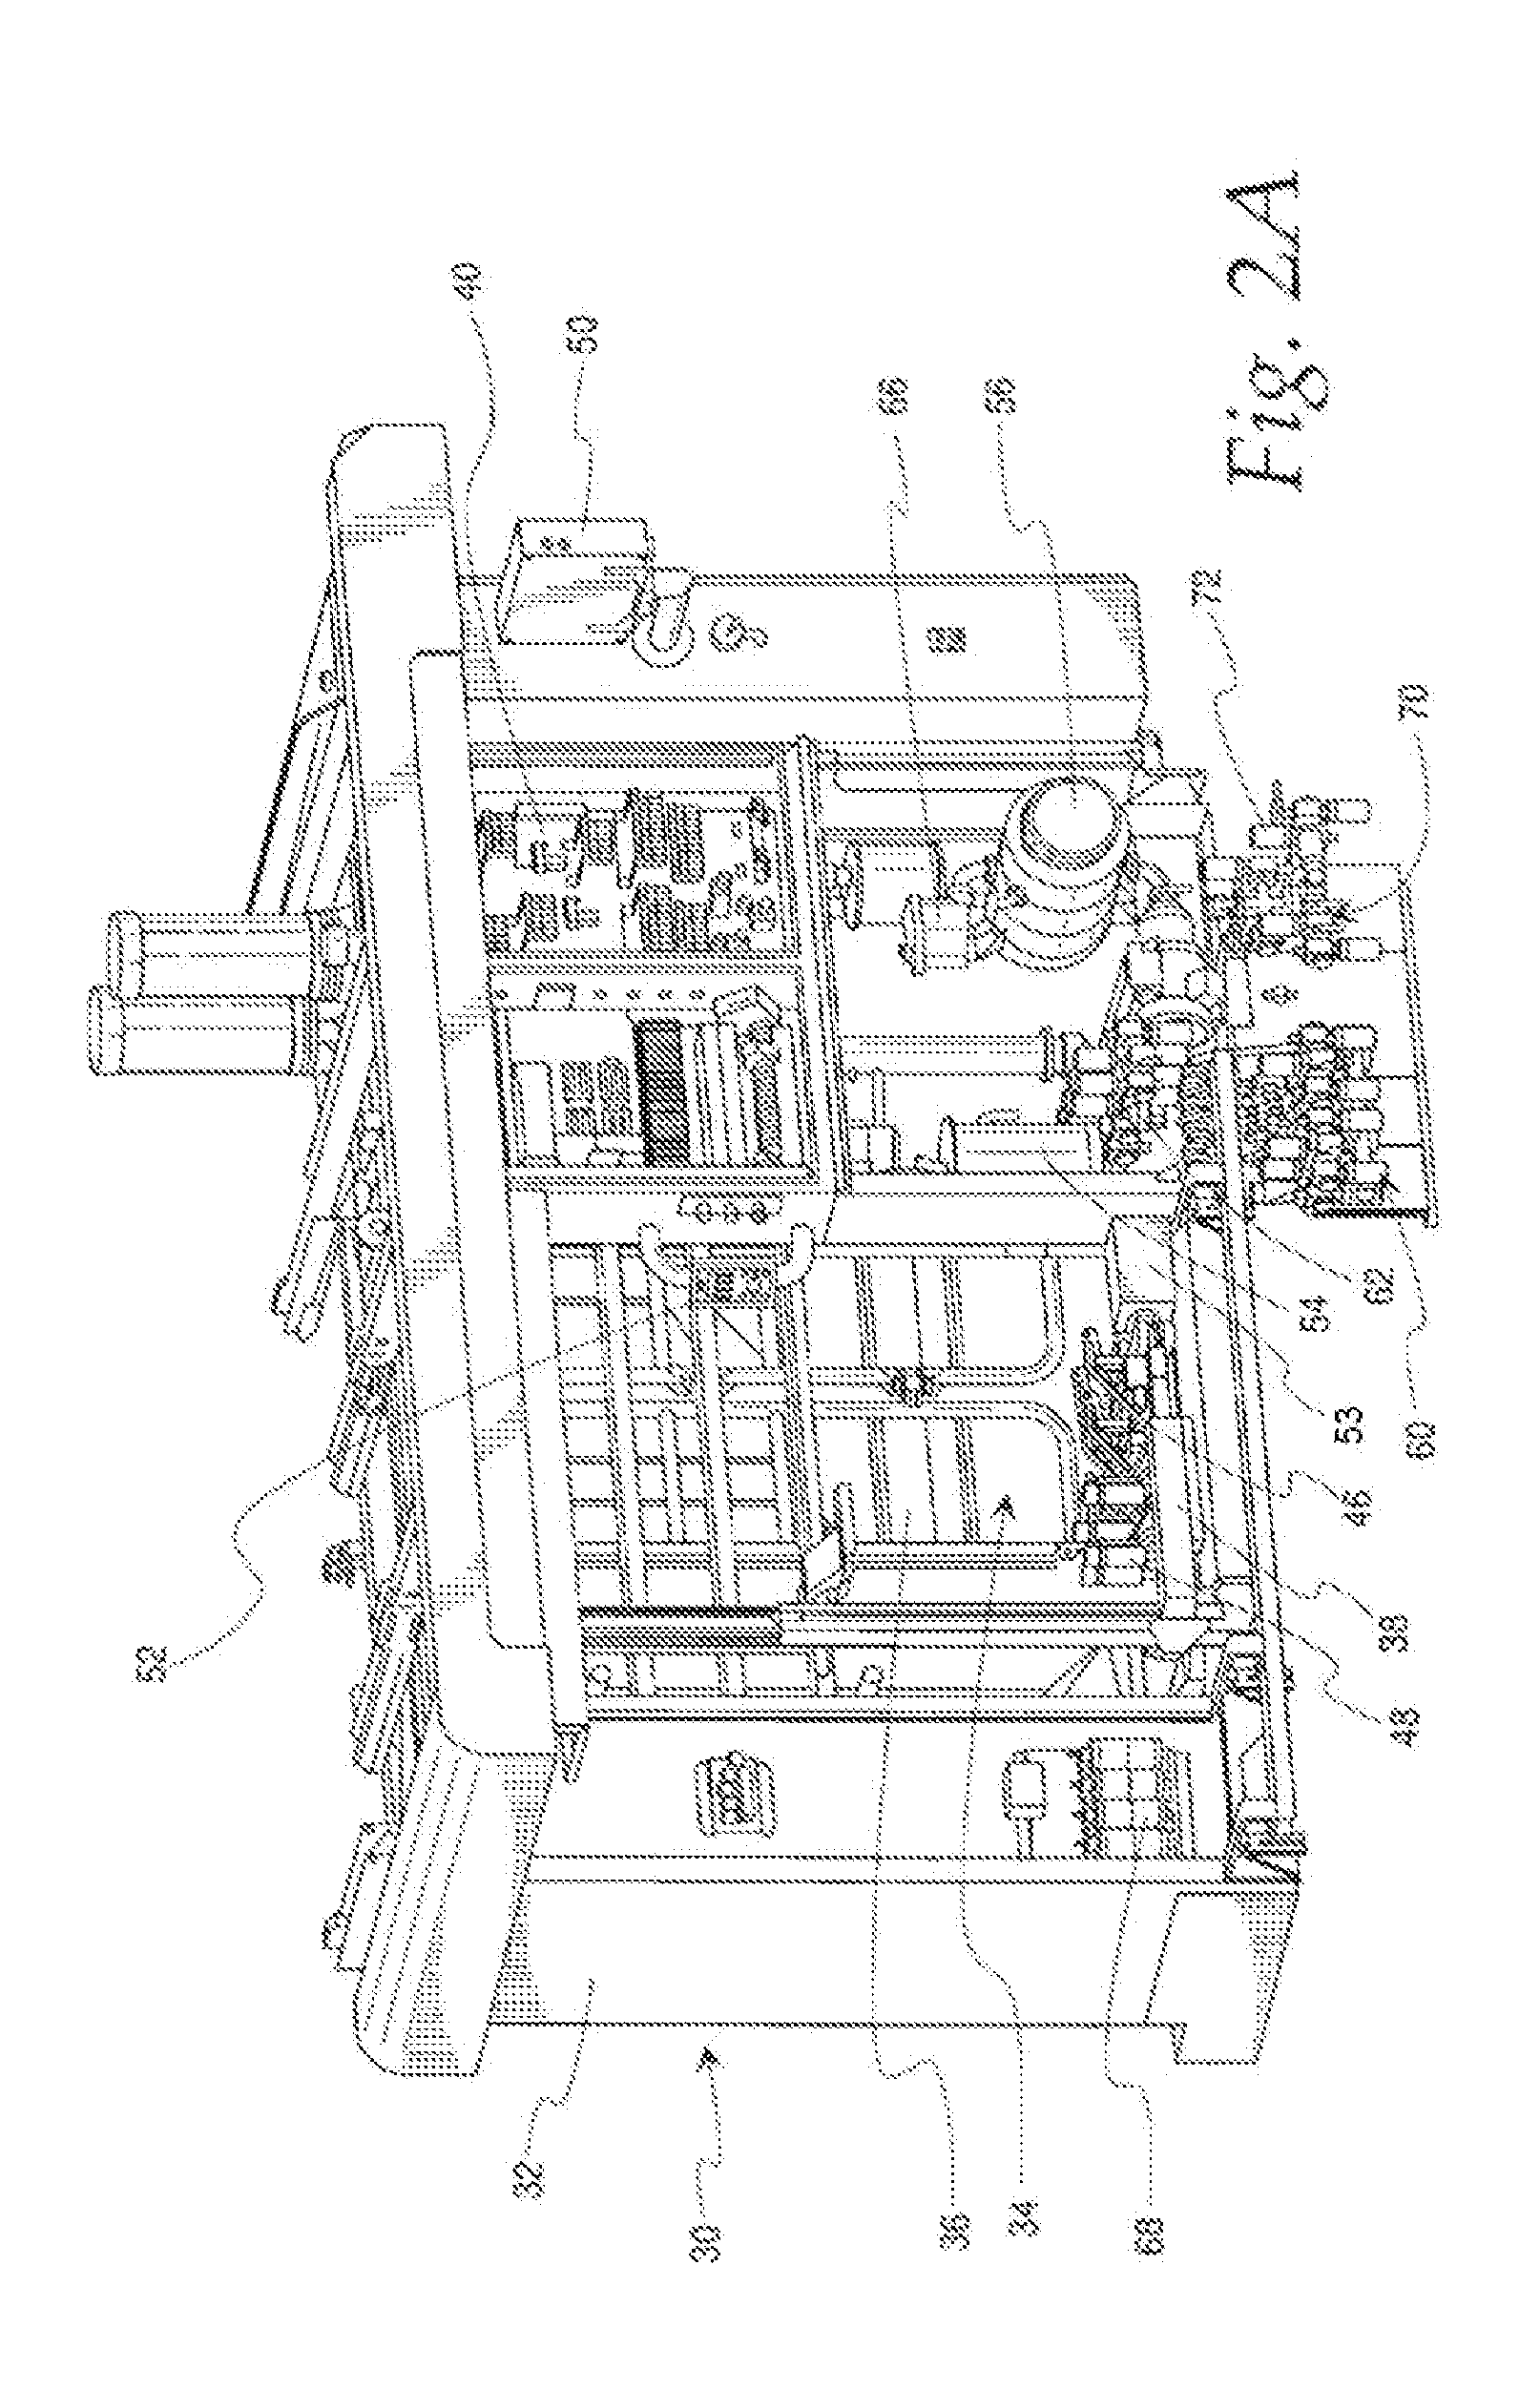 Dairy animal milking preparation system and methods